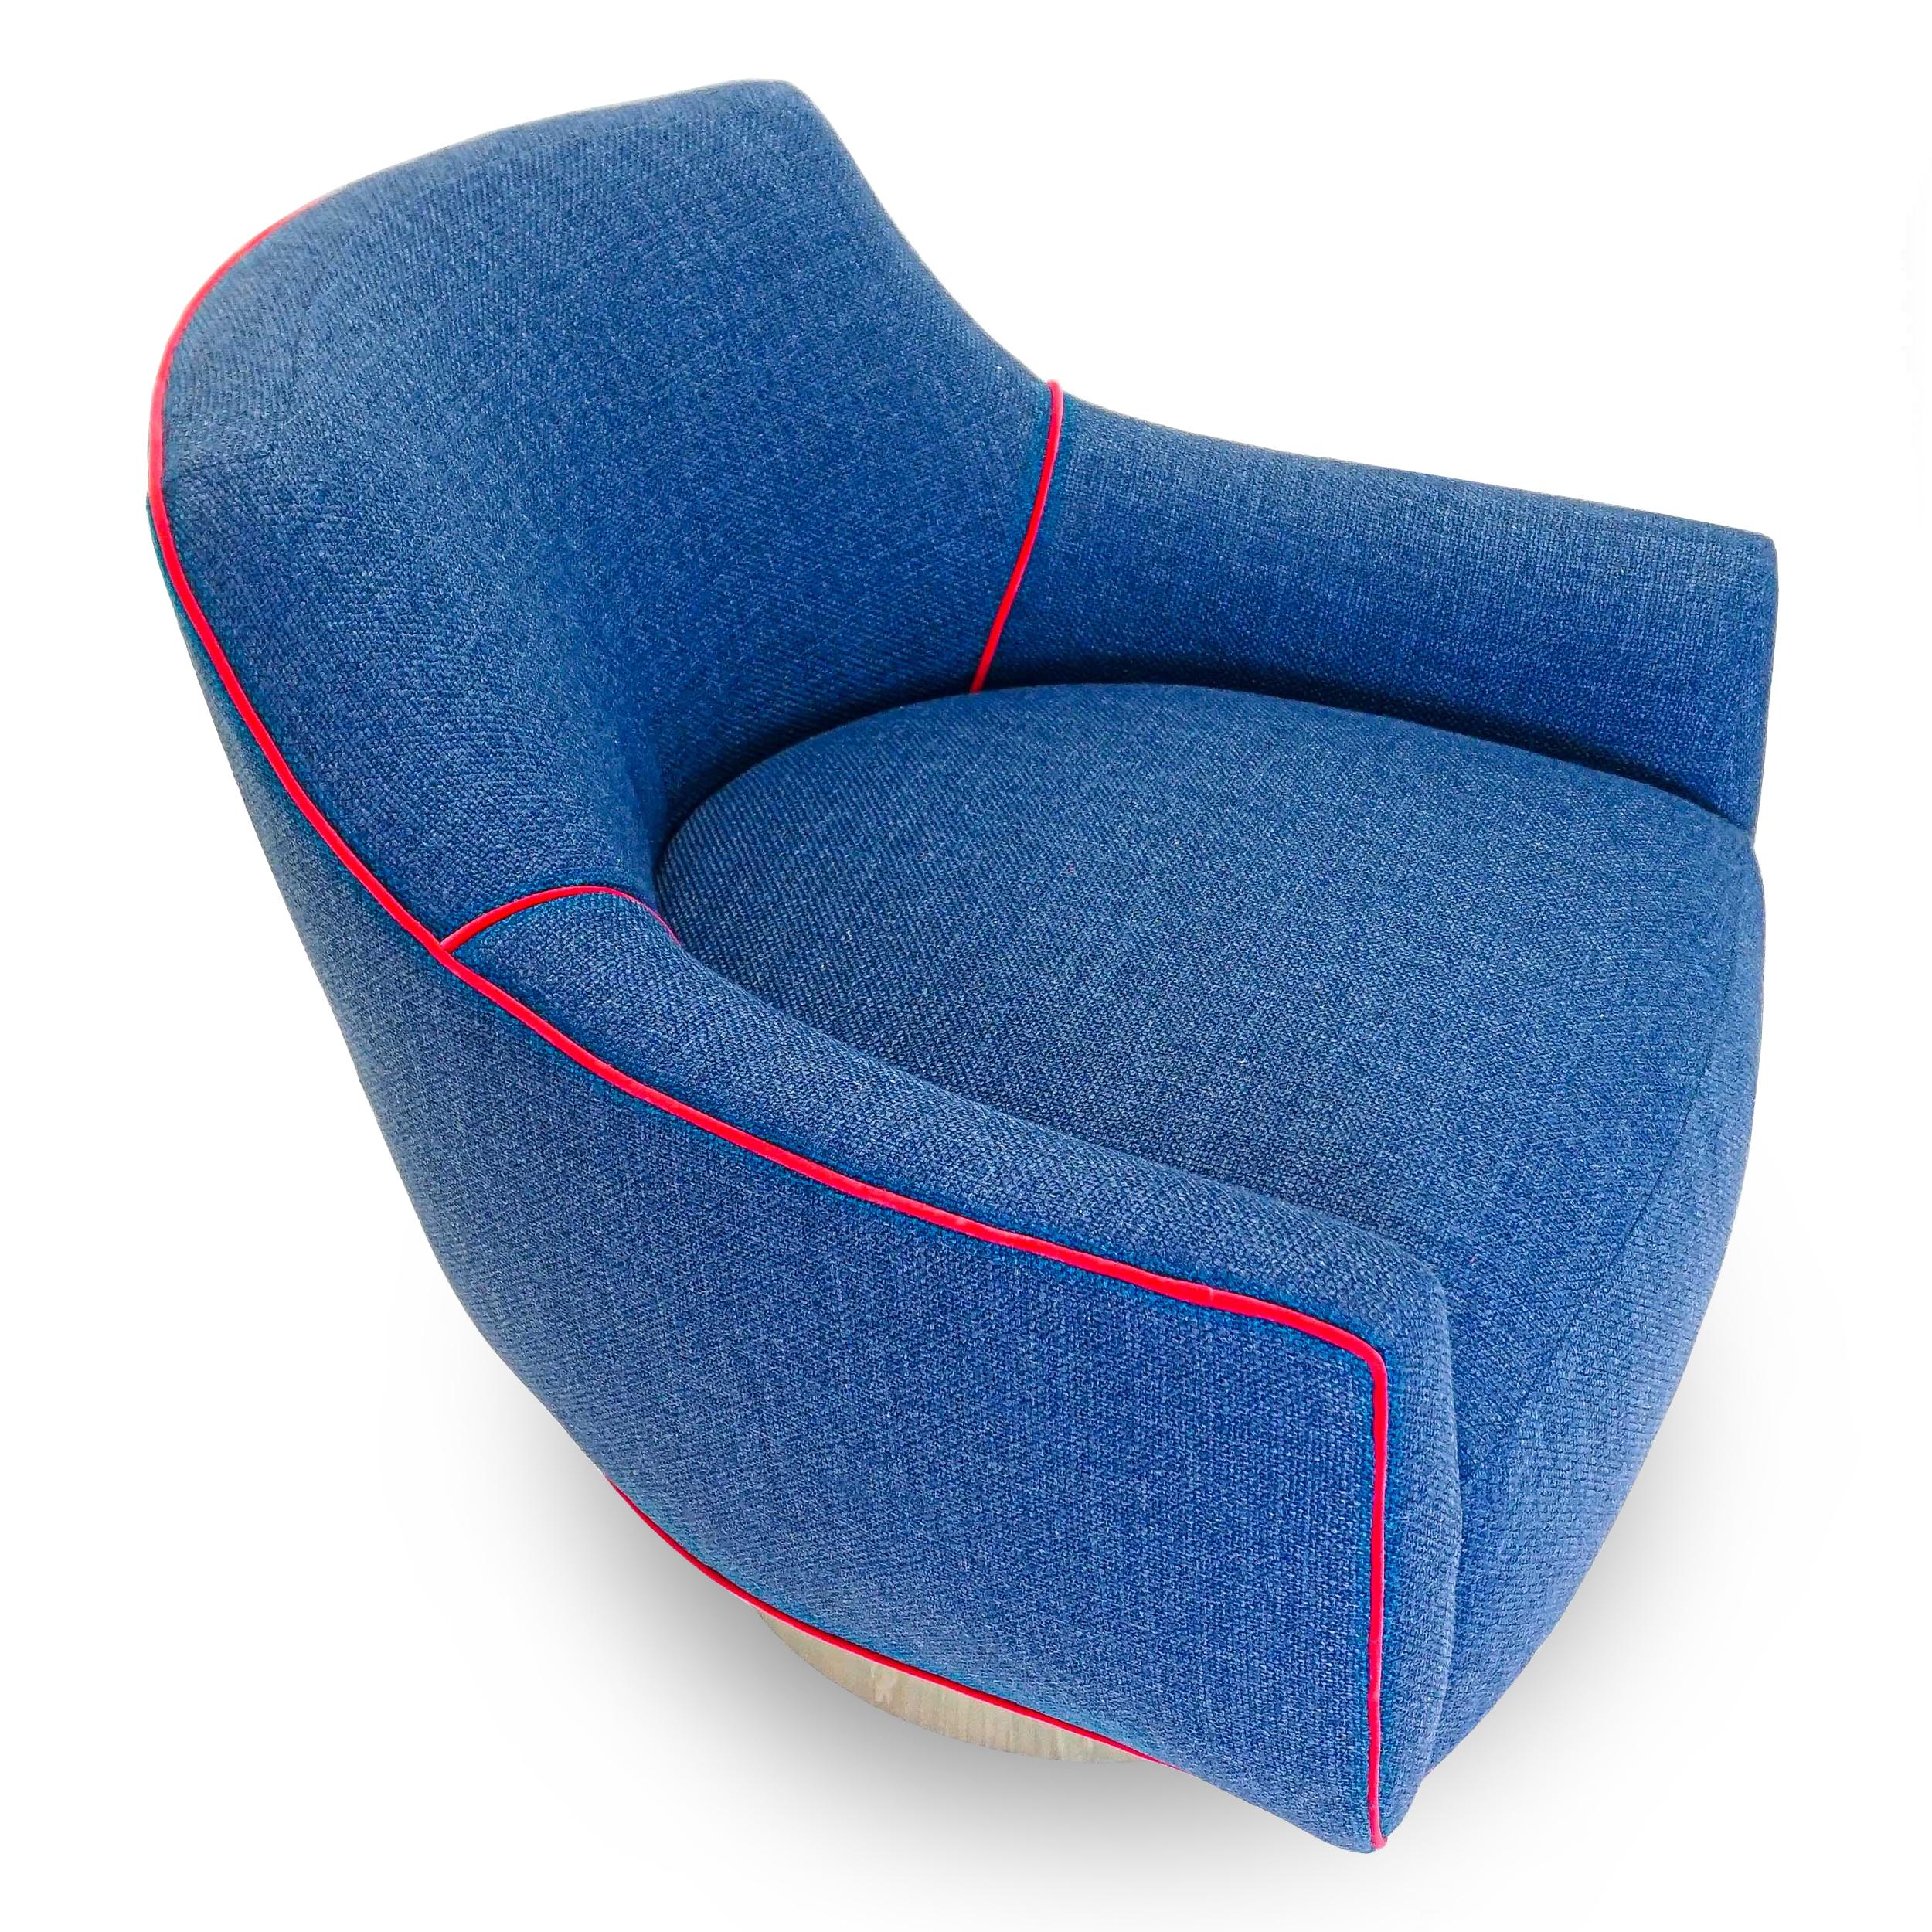 This modern swivel is covered in a soft chunky synthetic woven cobalt blue fabric by Scalamandre, accented with a fuchsia velvet welting.
Frame is solid hard maple. It has a tight seat and back cushion design with gently sloping winged arms. Seat